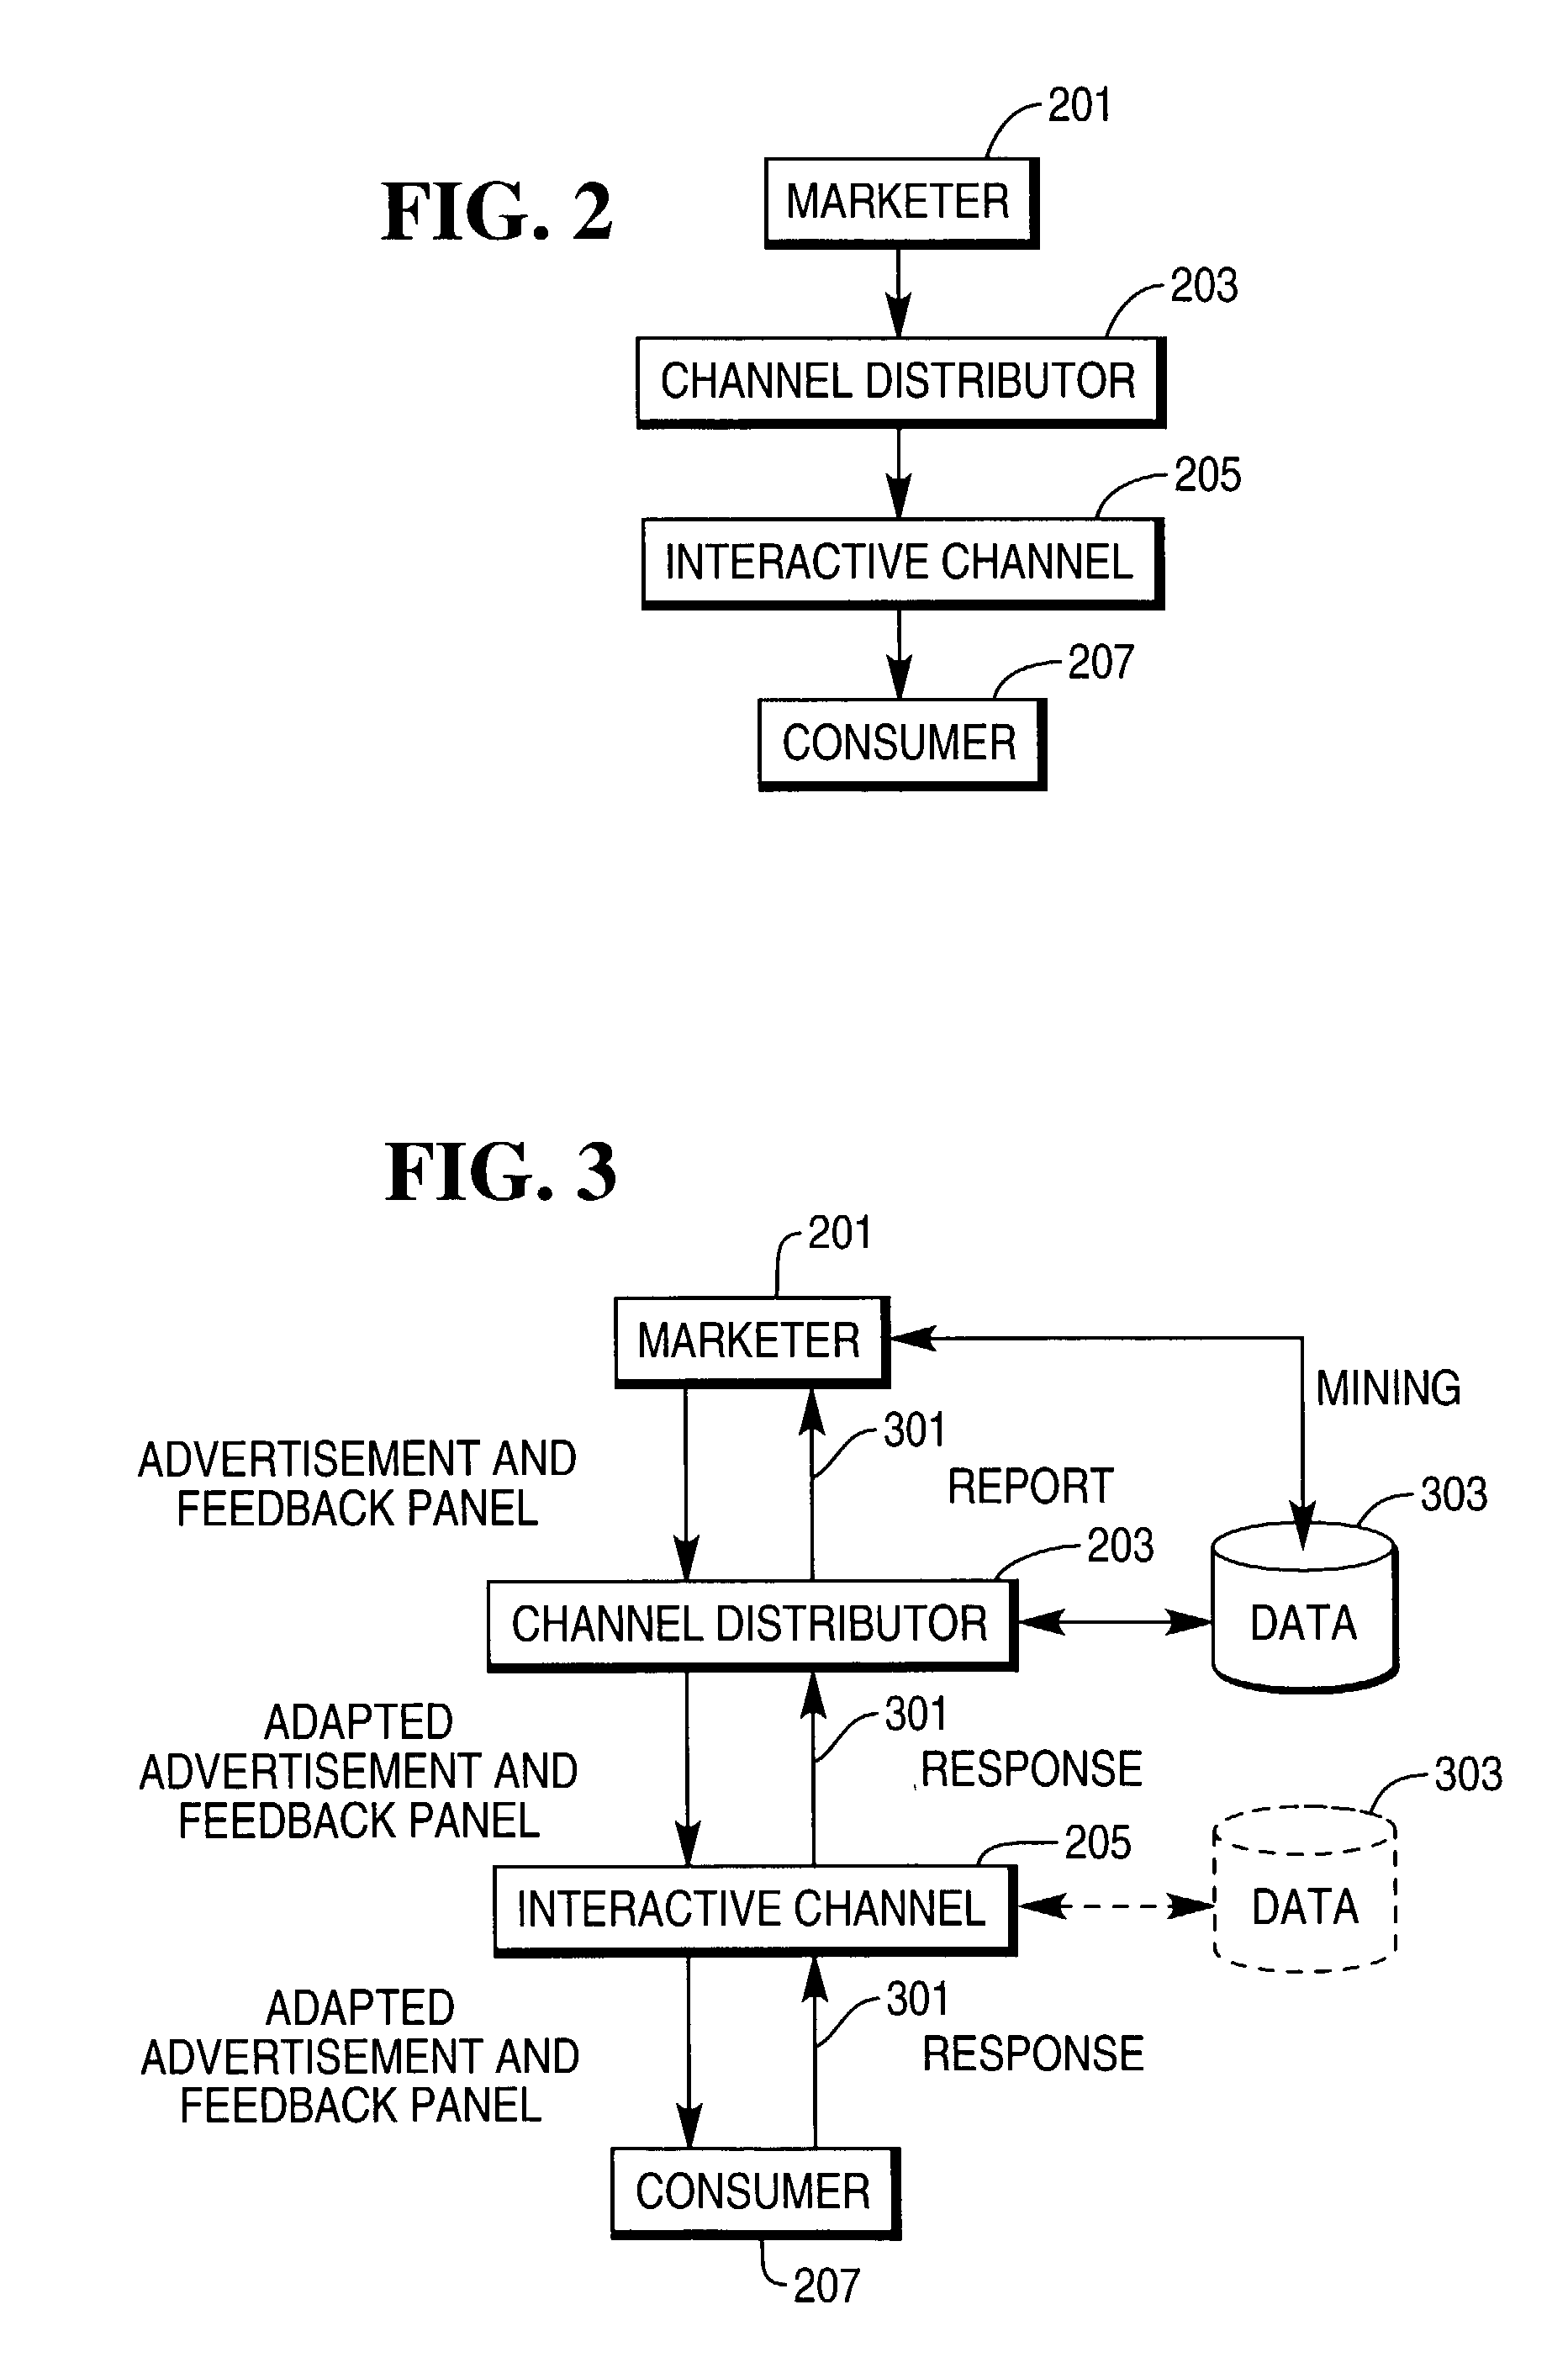 Method for providing feedback to advertising on interactive channels